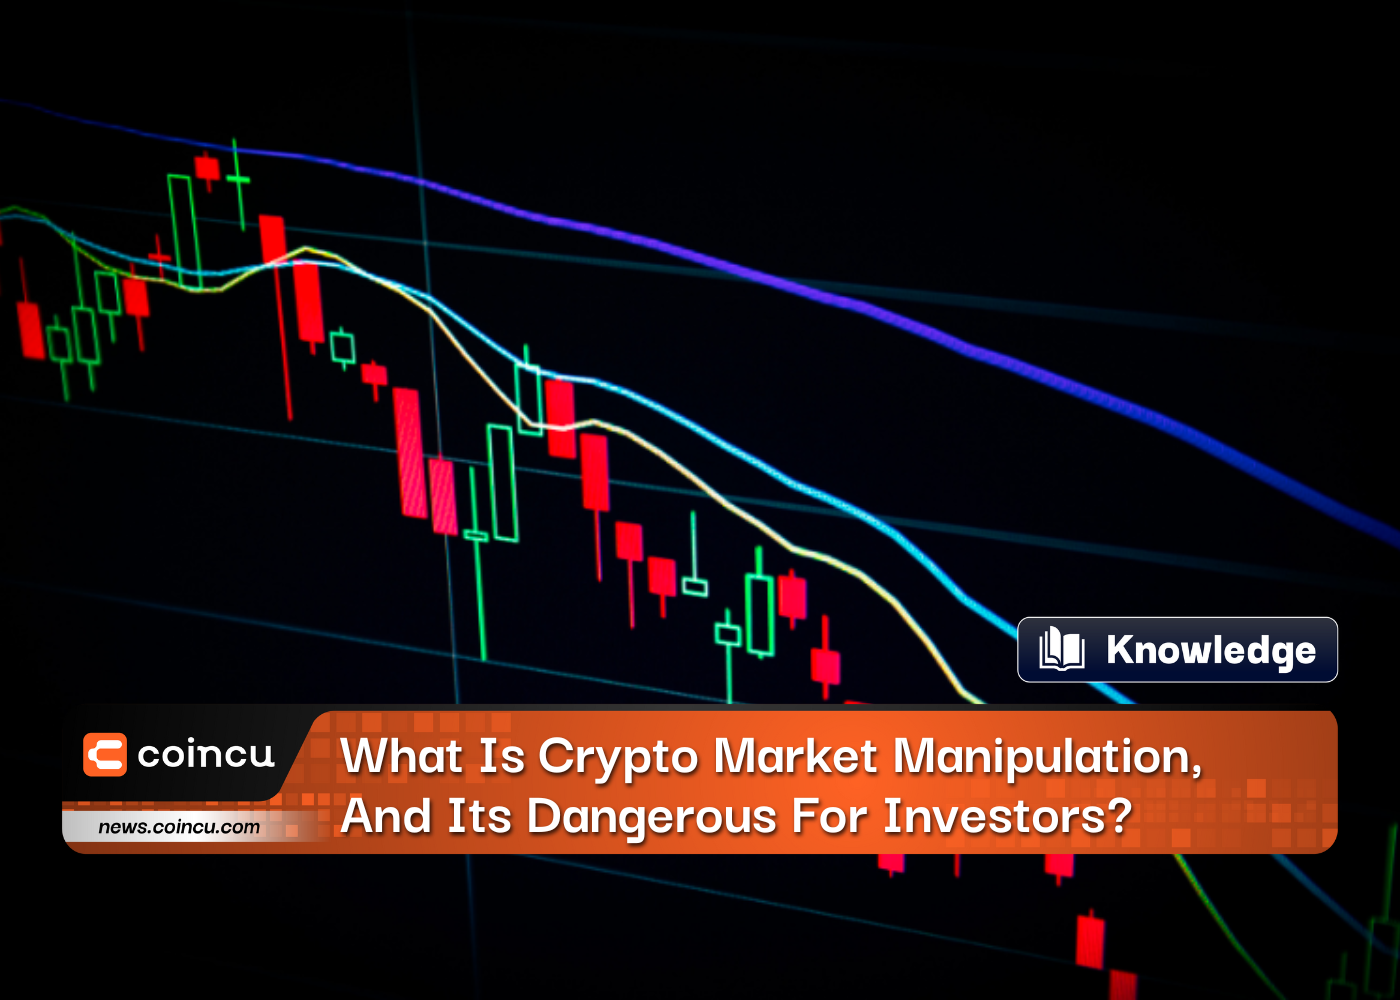 What Is Crypto Market Manipulation, And Its Dangerous For Investors?